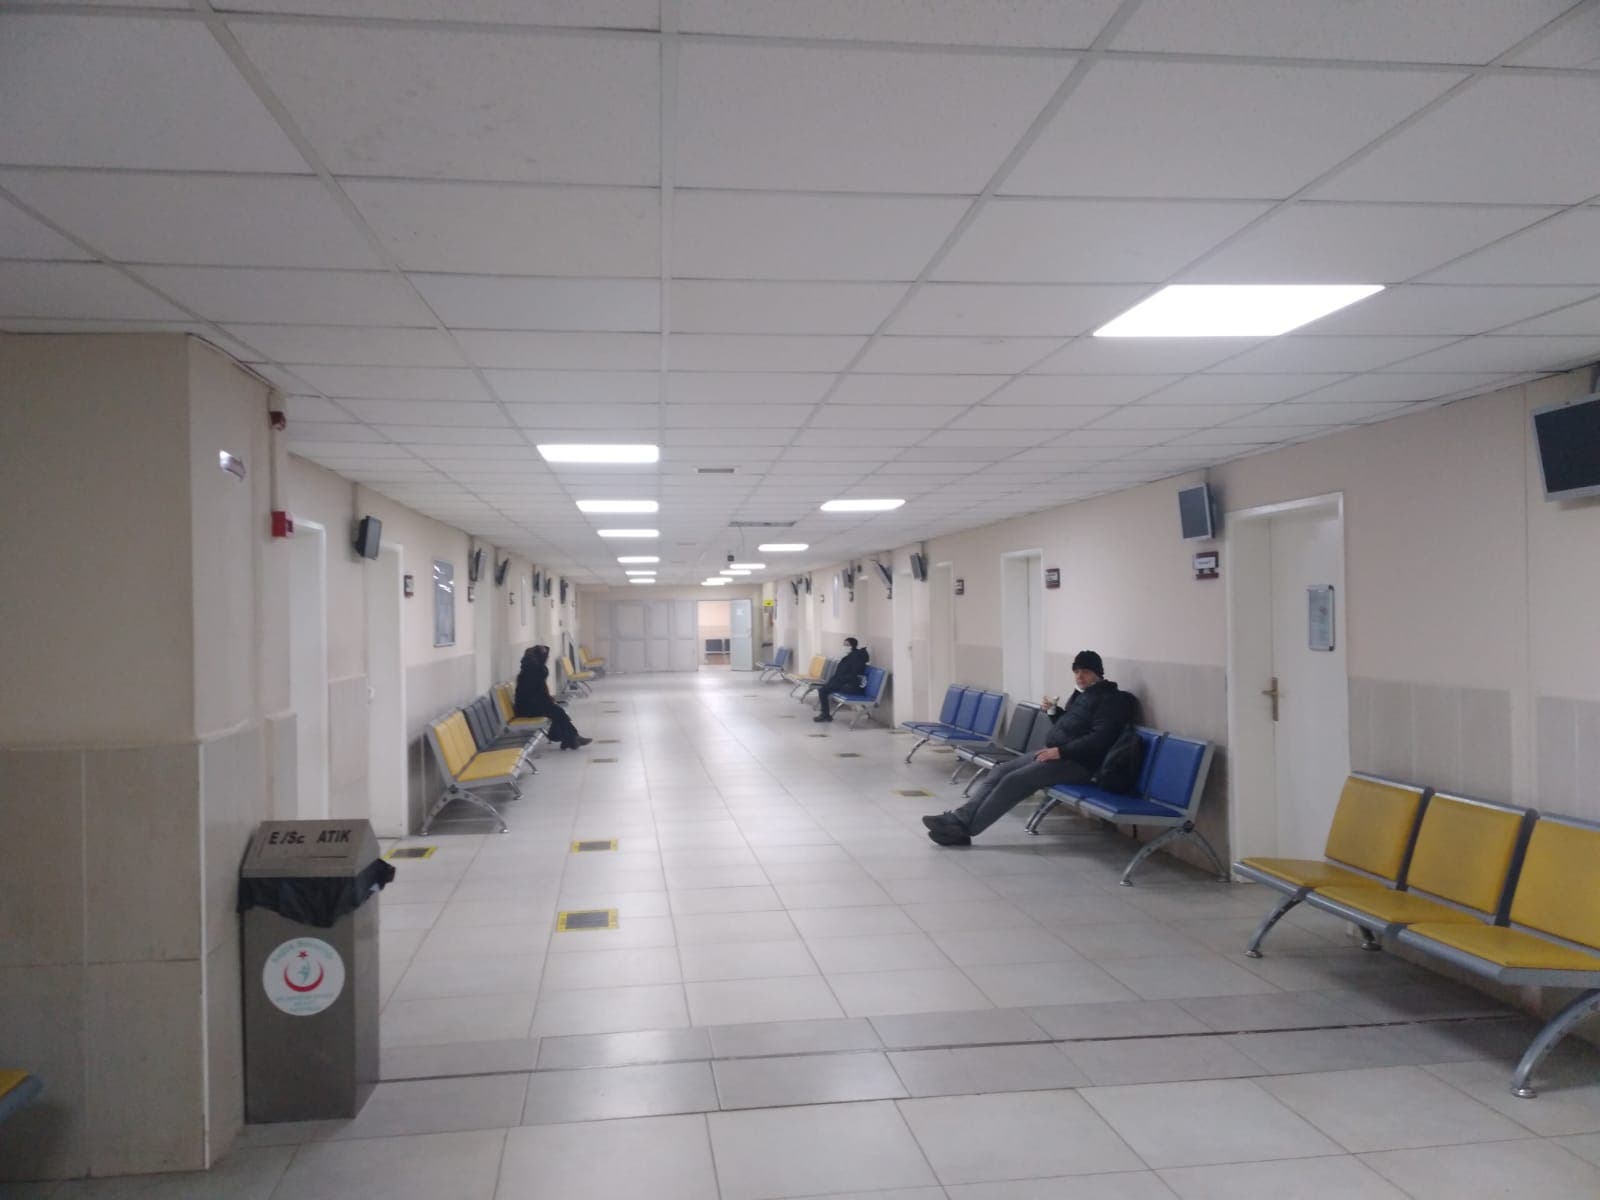 A medical center devoid of patients